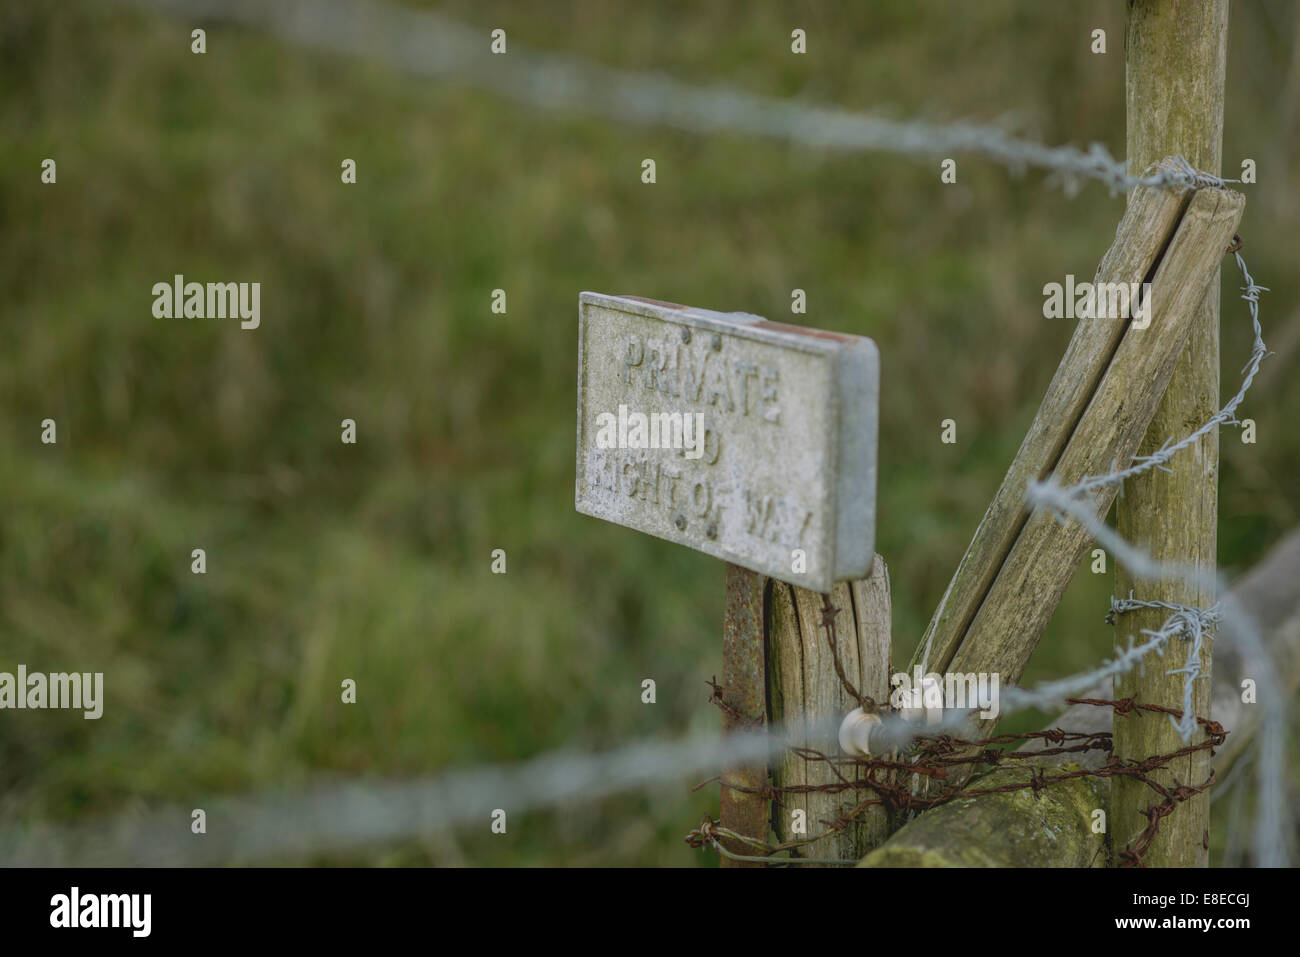 Private No Right of Way Sign amongst Barbwire and Fence Posts Stock Photo